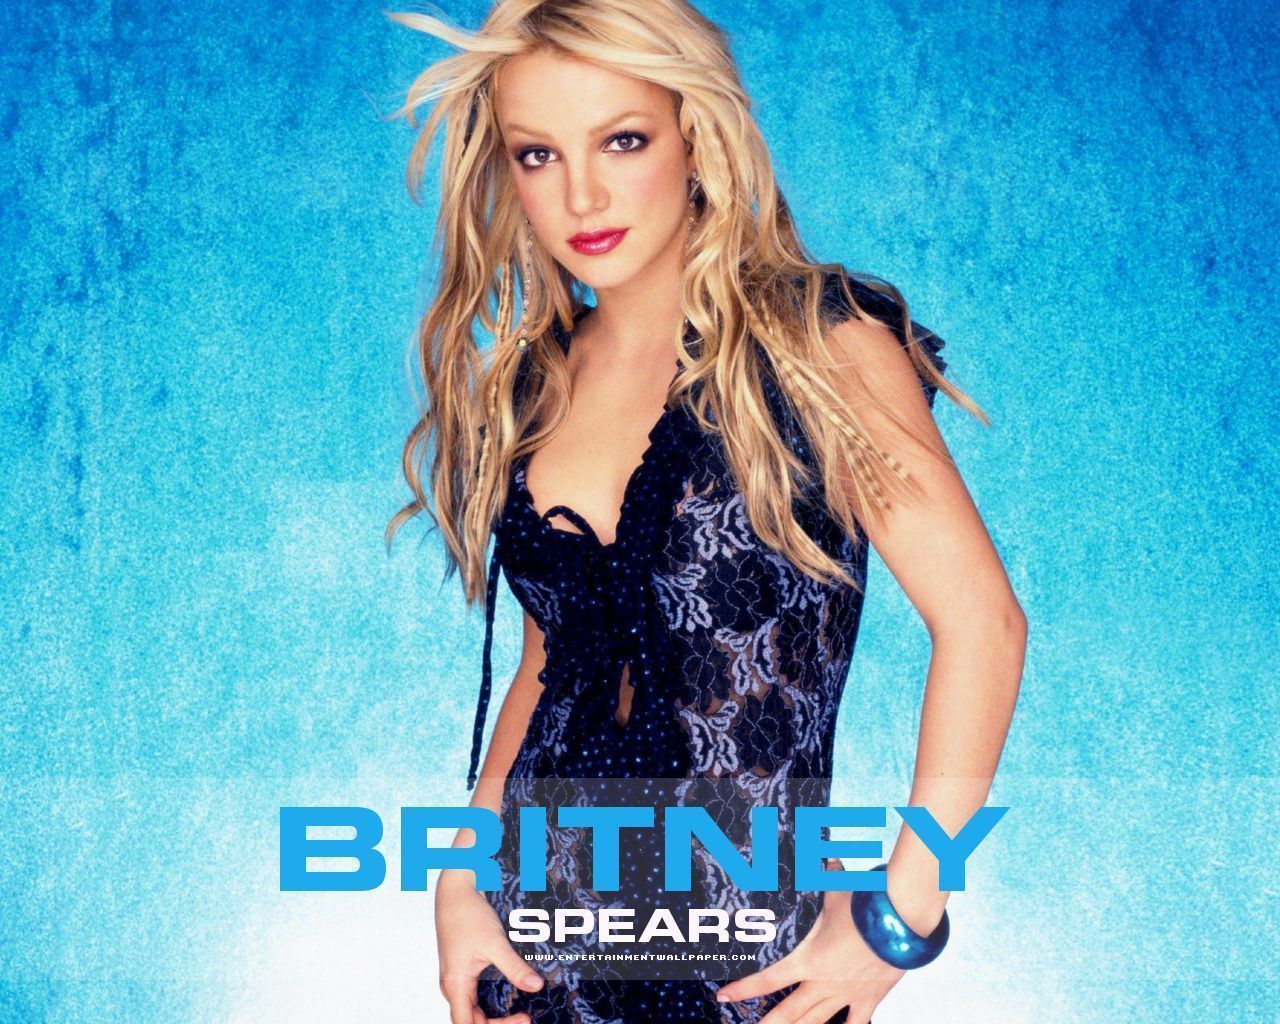 Iphone Britney Spears Wallpapers | Full HD Pictures